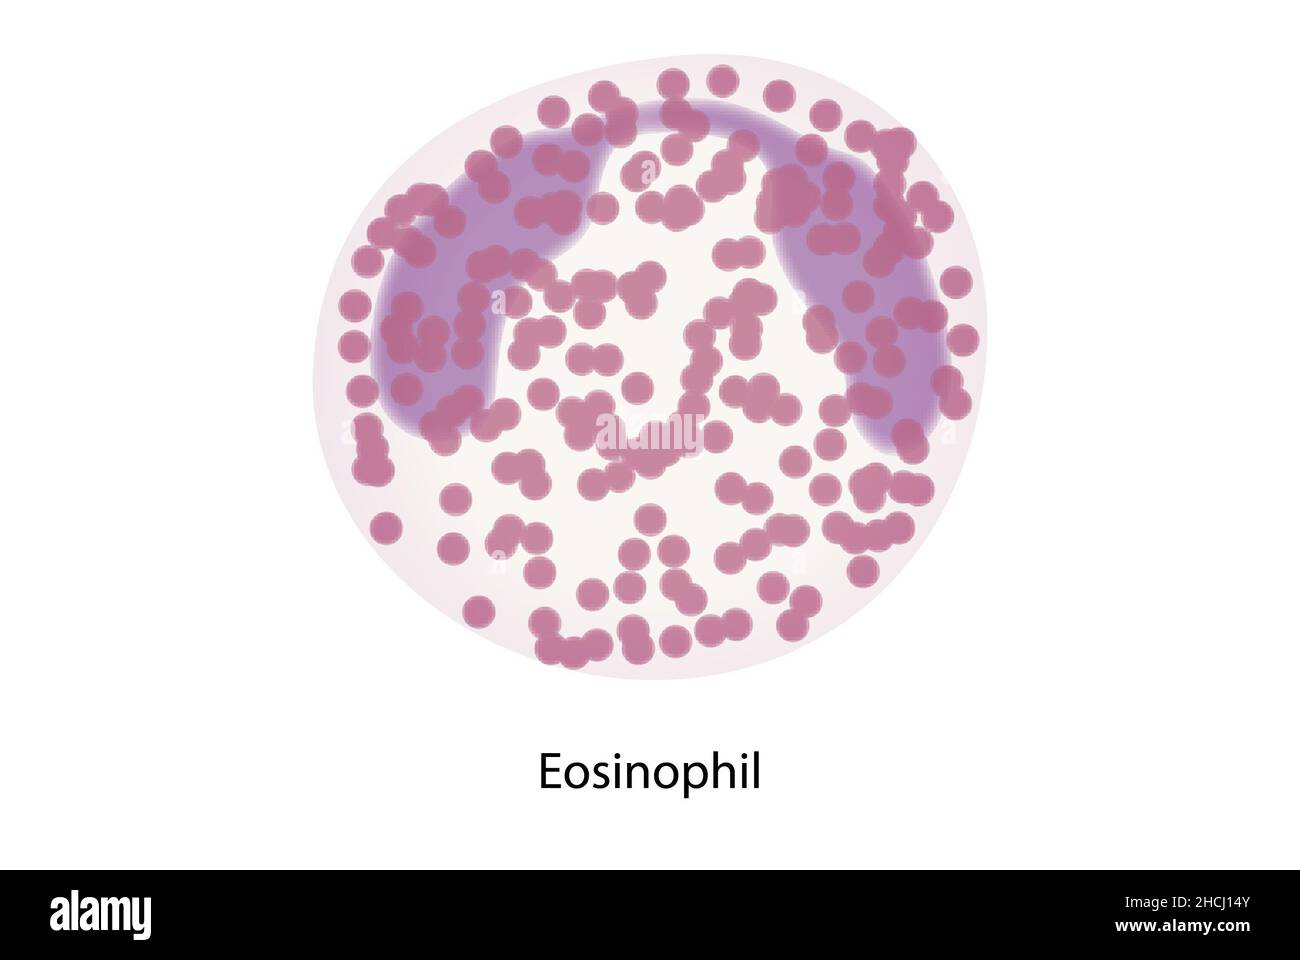 Eosinophil, white blood cells, immune system cells Stock Photo